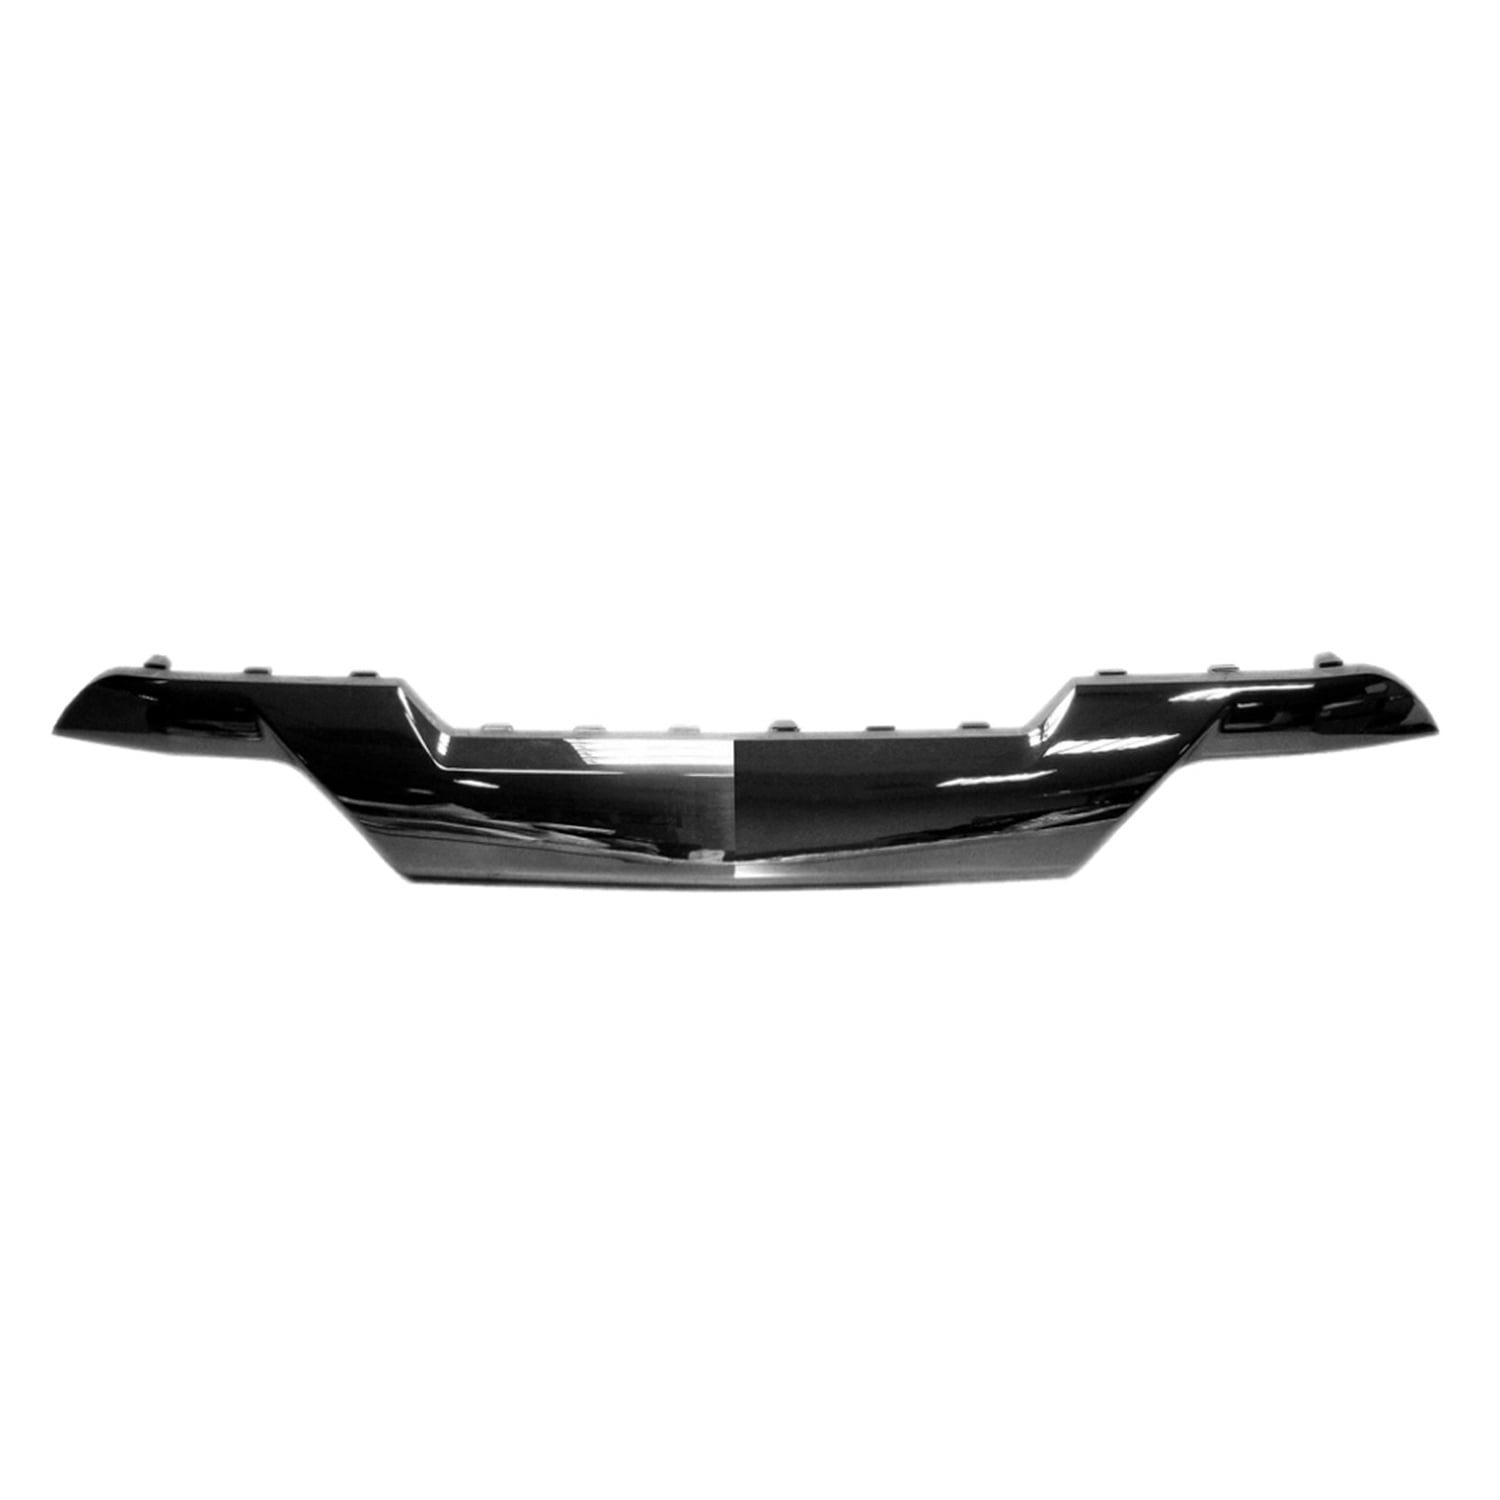 23243083 w/Impact Bar Front Chrome For Chevy Silverado 1500 Skid Plate 2016...